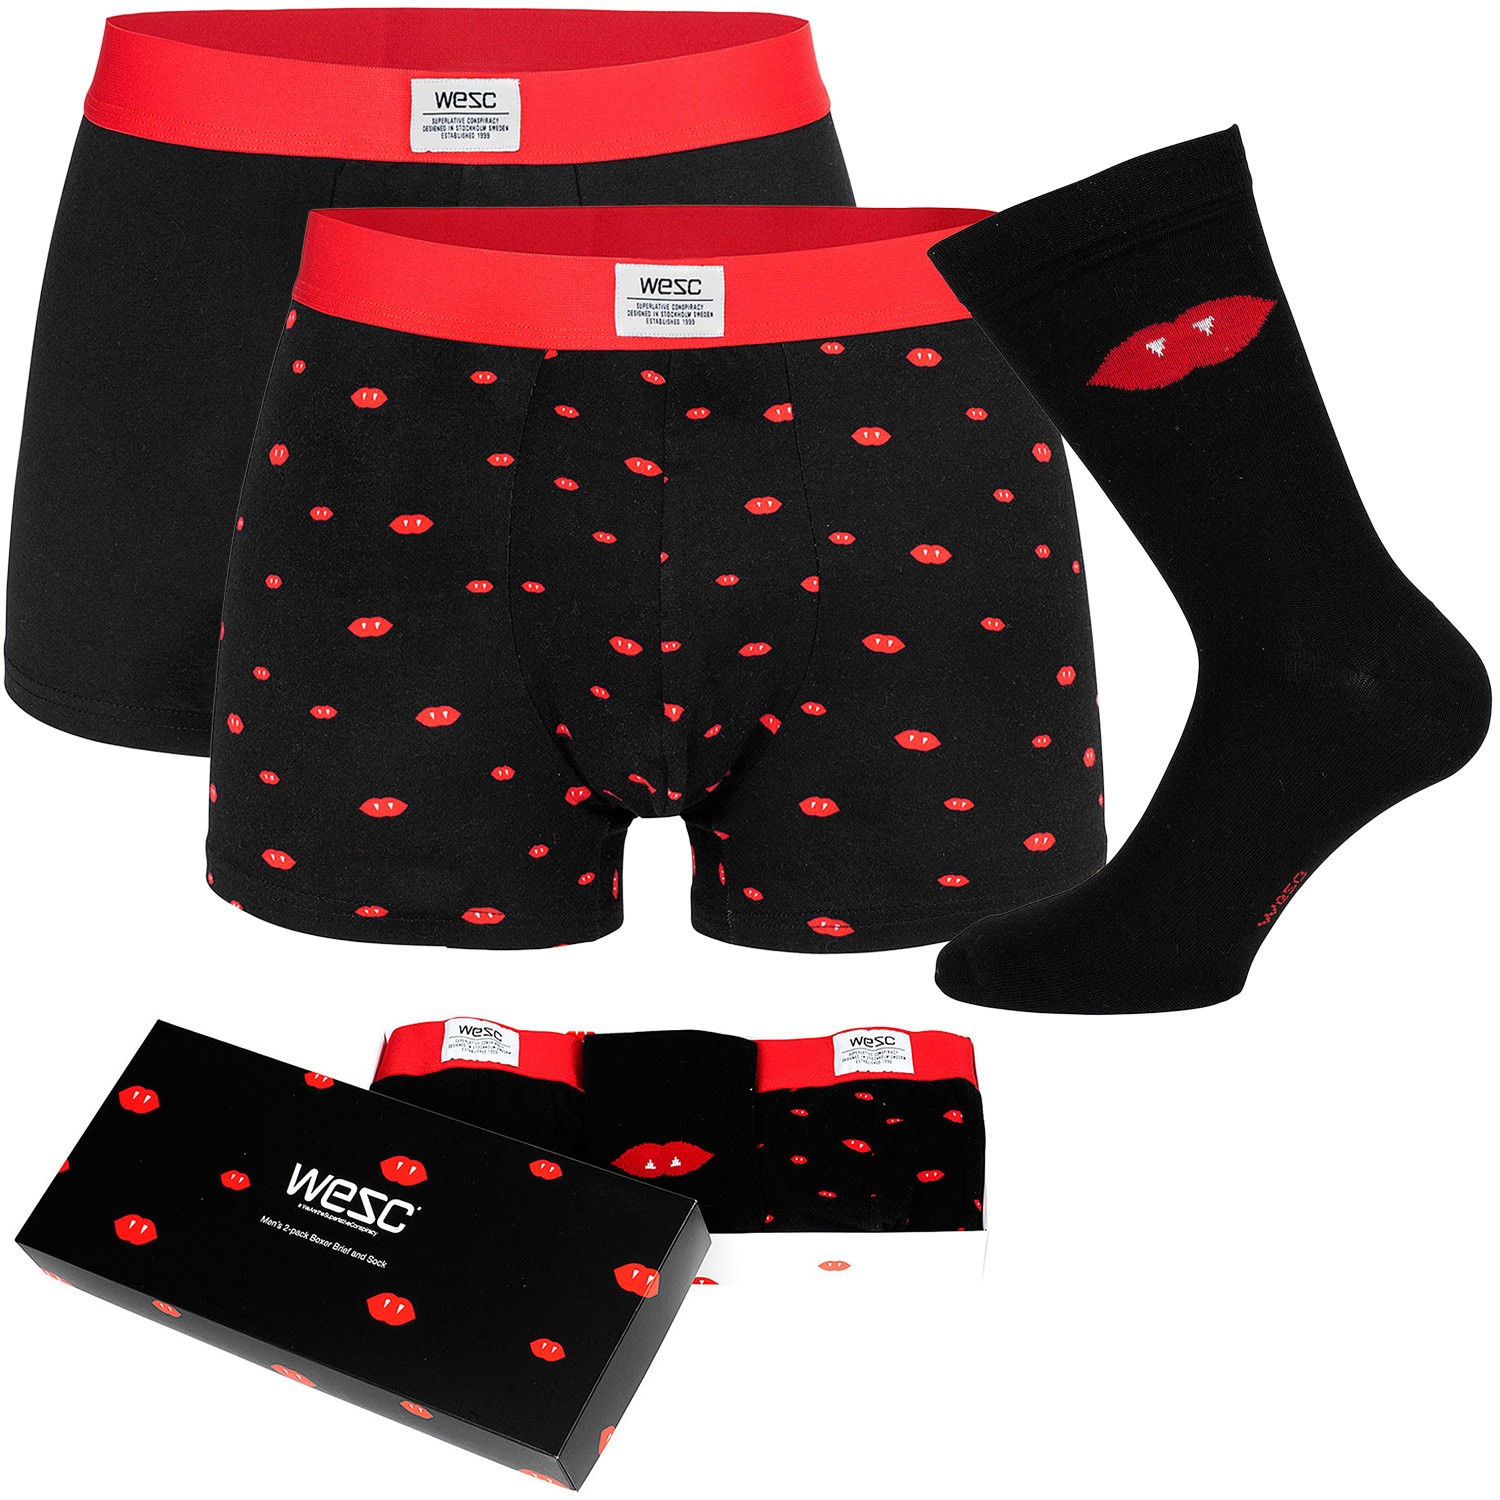 WESC Fang Boxer Briefs and Sock Box